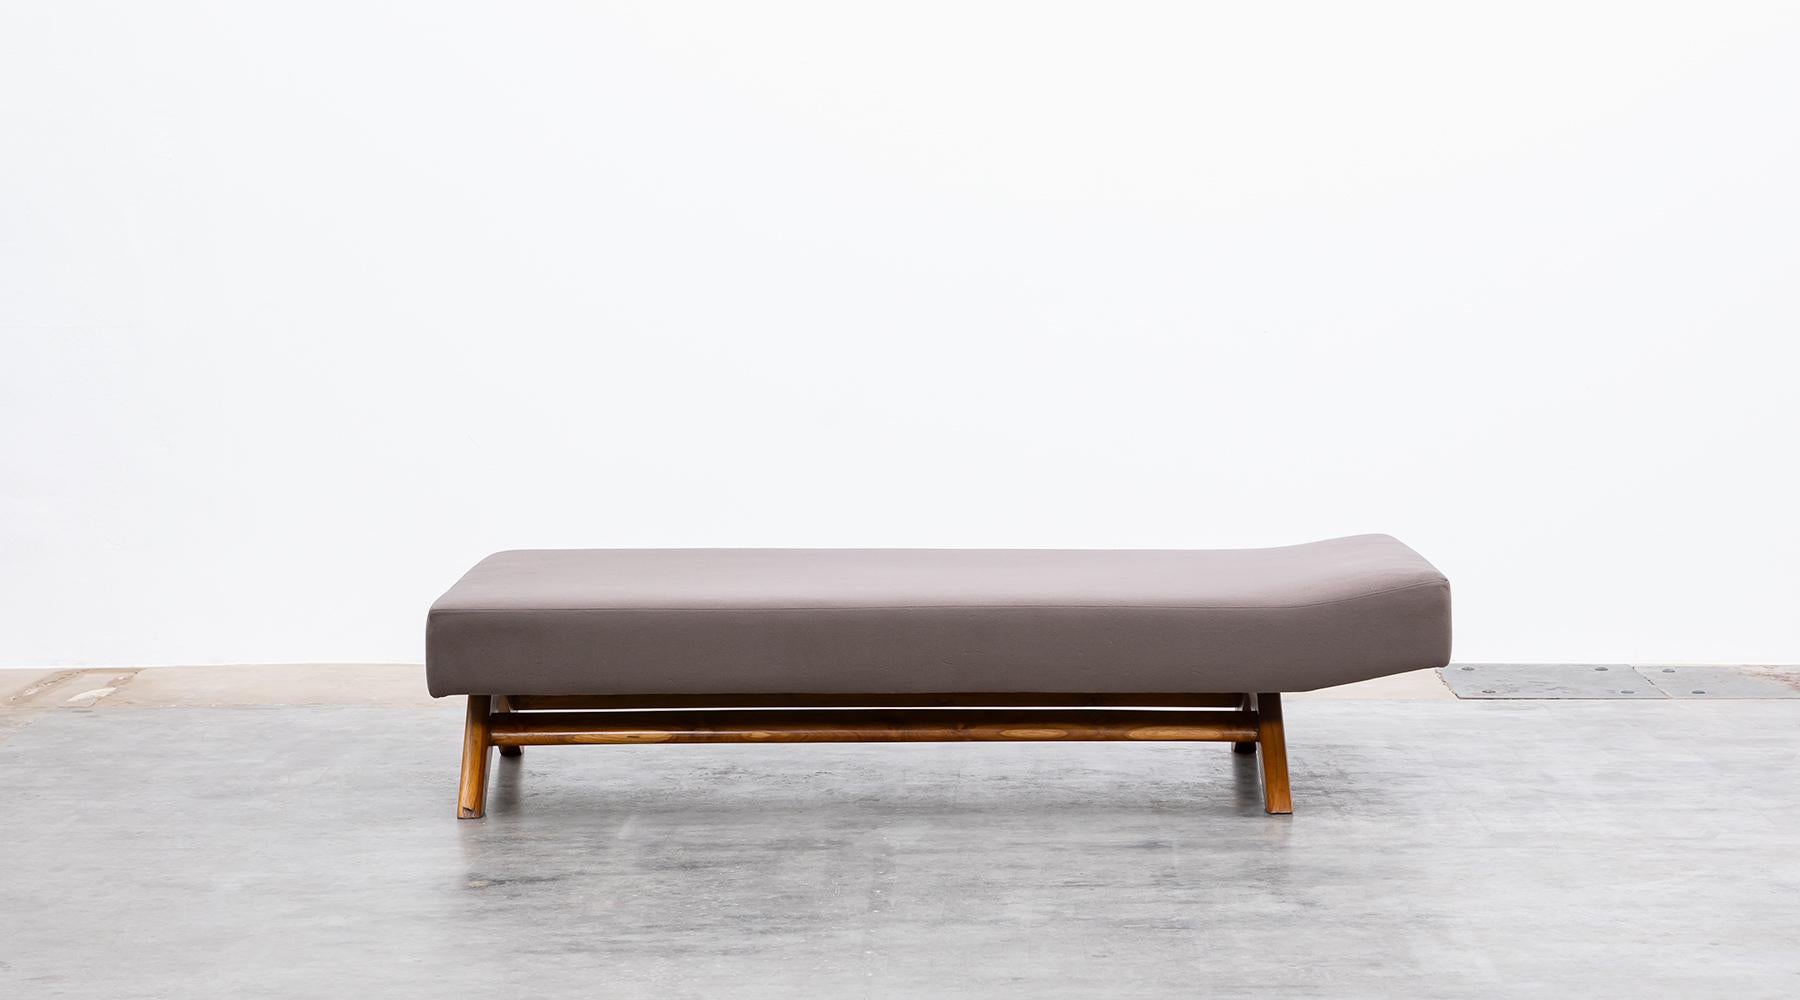 Teak and upholstery, Daybed designed by Pierre Jeanneret for Chandigarh, India, 1955.

Single original Daybed by Pierre Jeanneret. This piece comes with a slight back rise and stands on a wooden frame the sides diverge in an A-shape from the